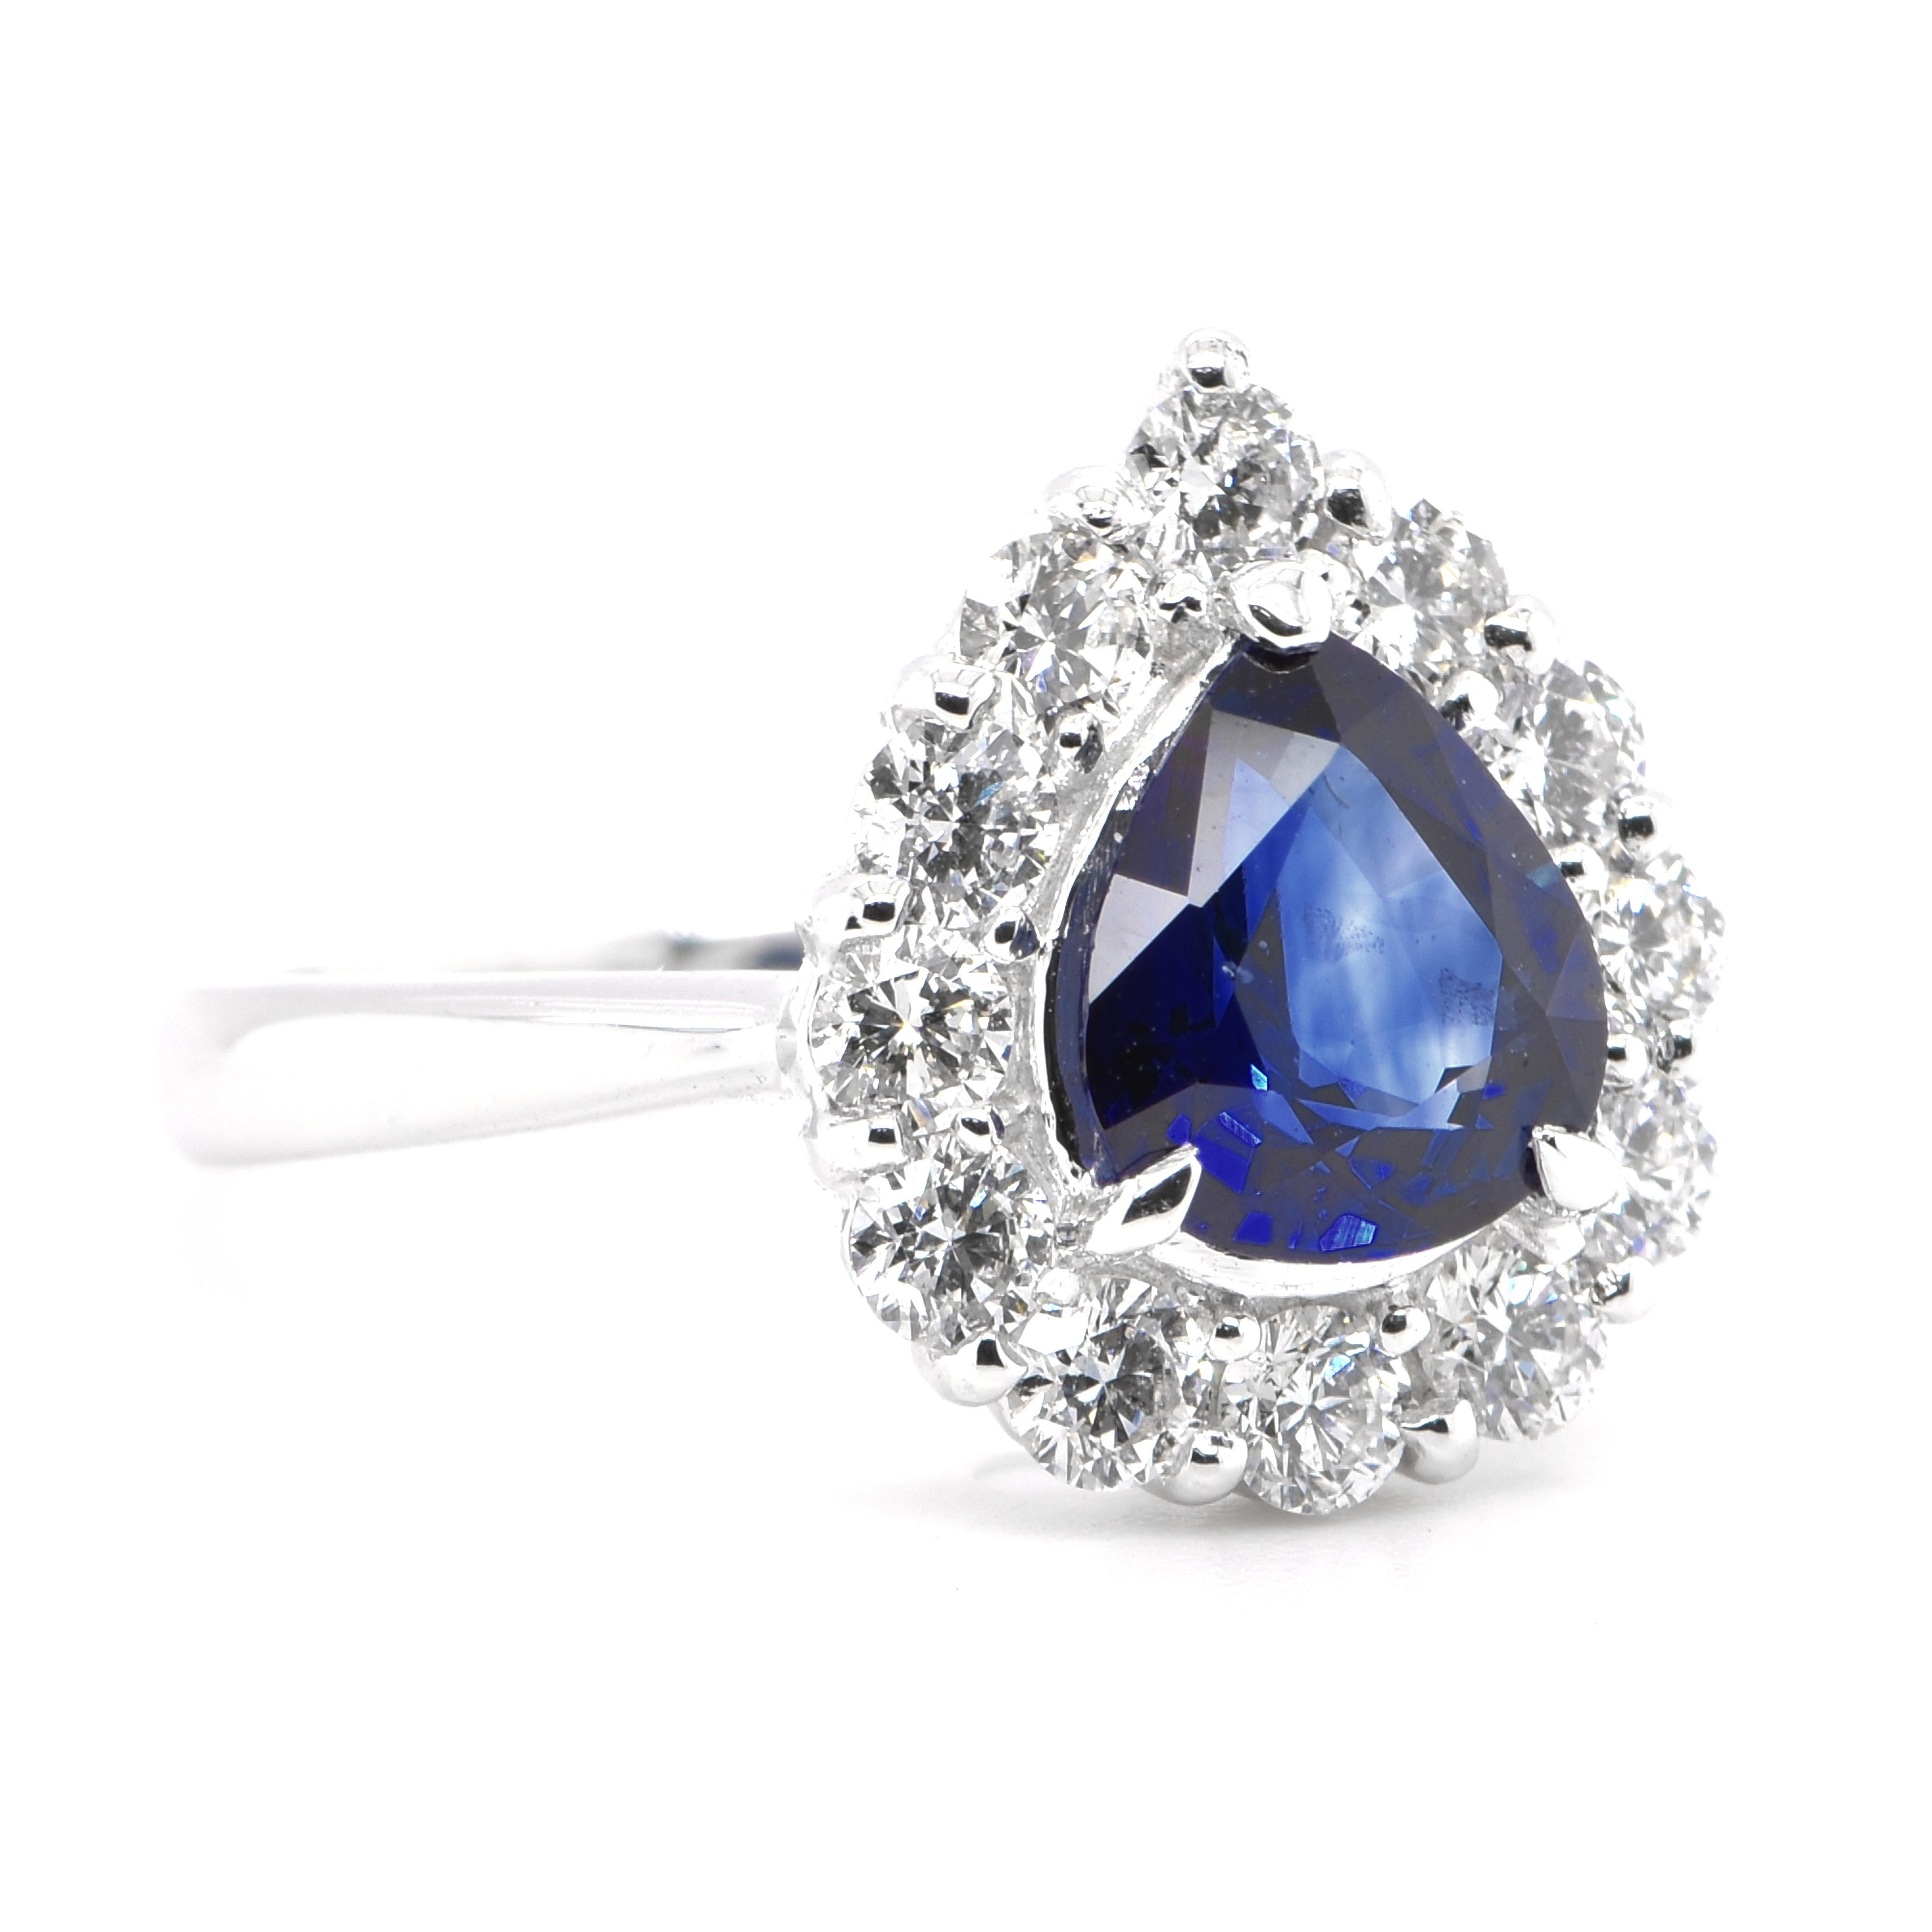 Modern GIA Certified 1.58 Carat Natural Ceylon Royal Blue Sapphire Ring Set in Platinum For Sale